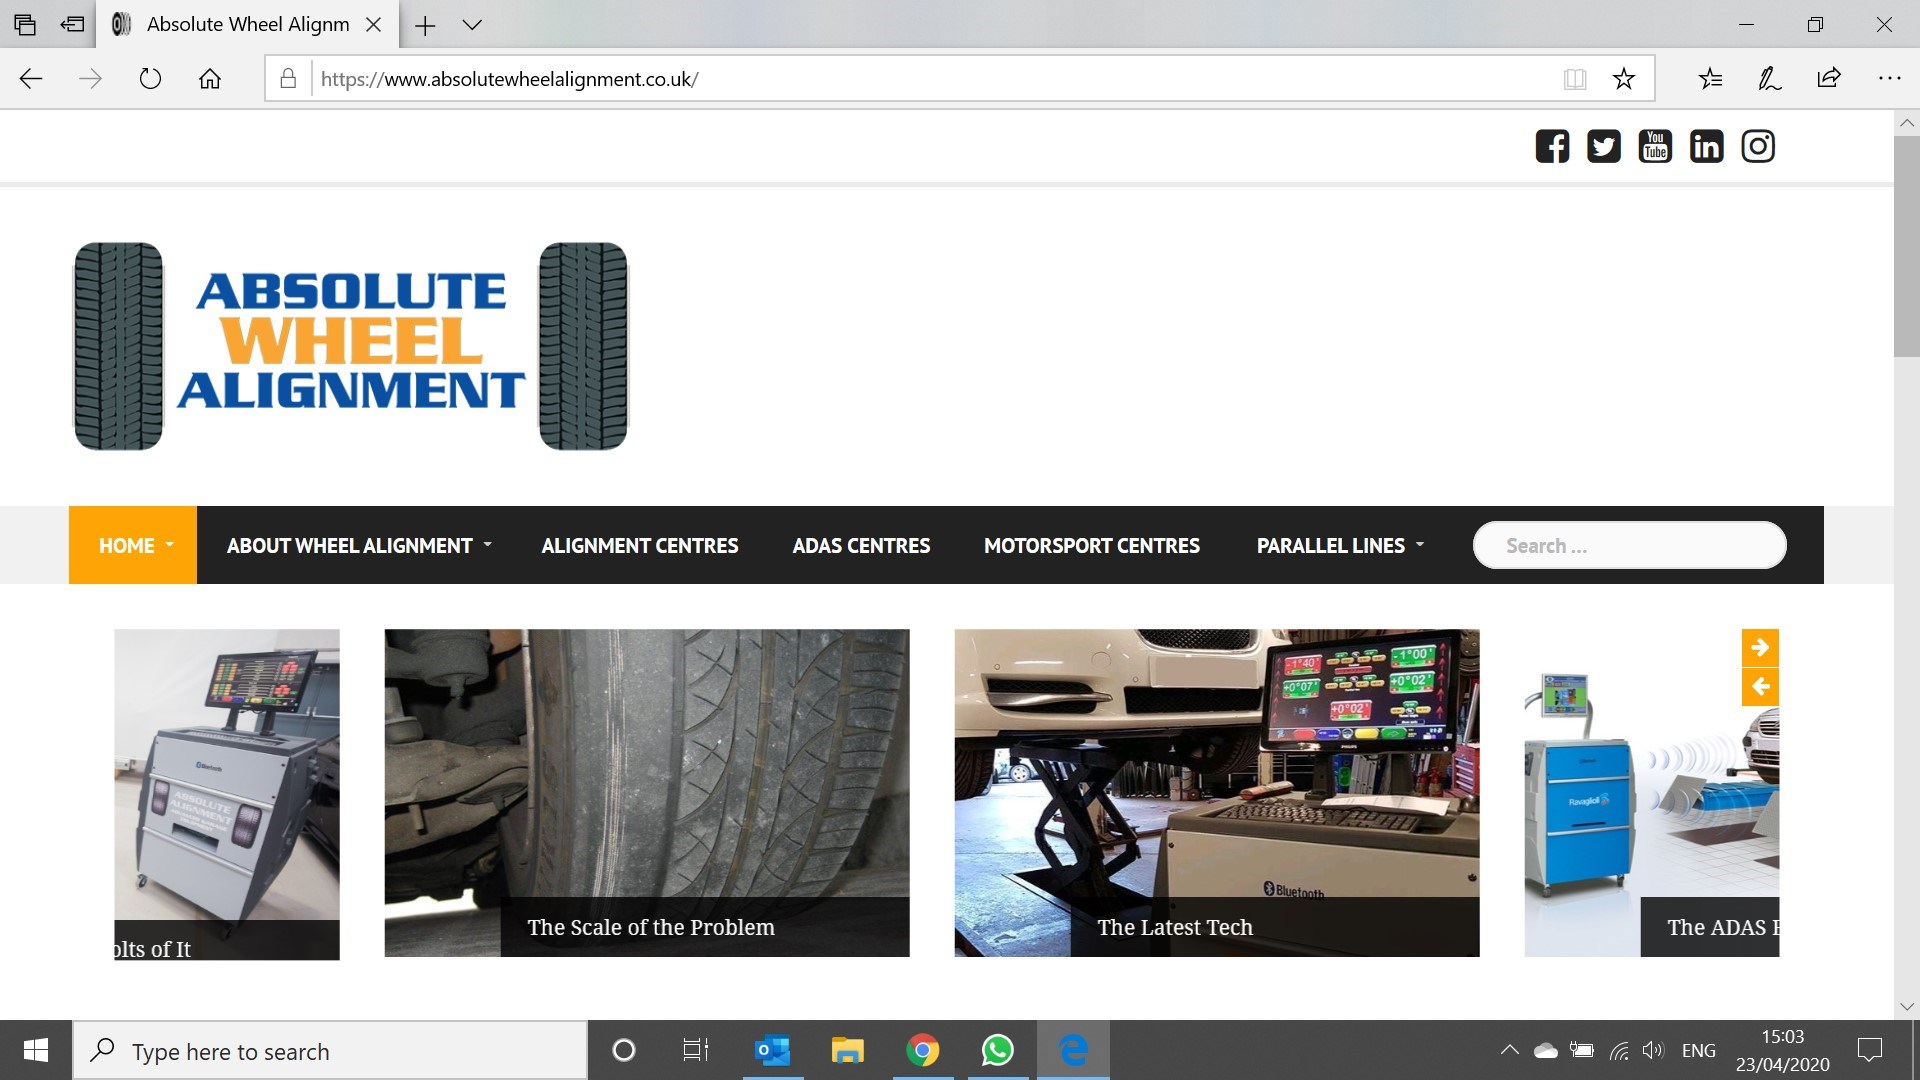 Welcome, Absolute Wheel Alignment